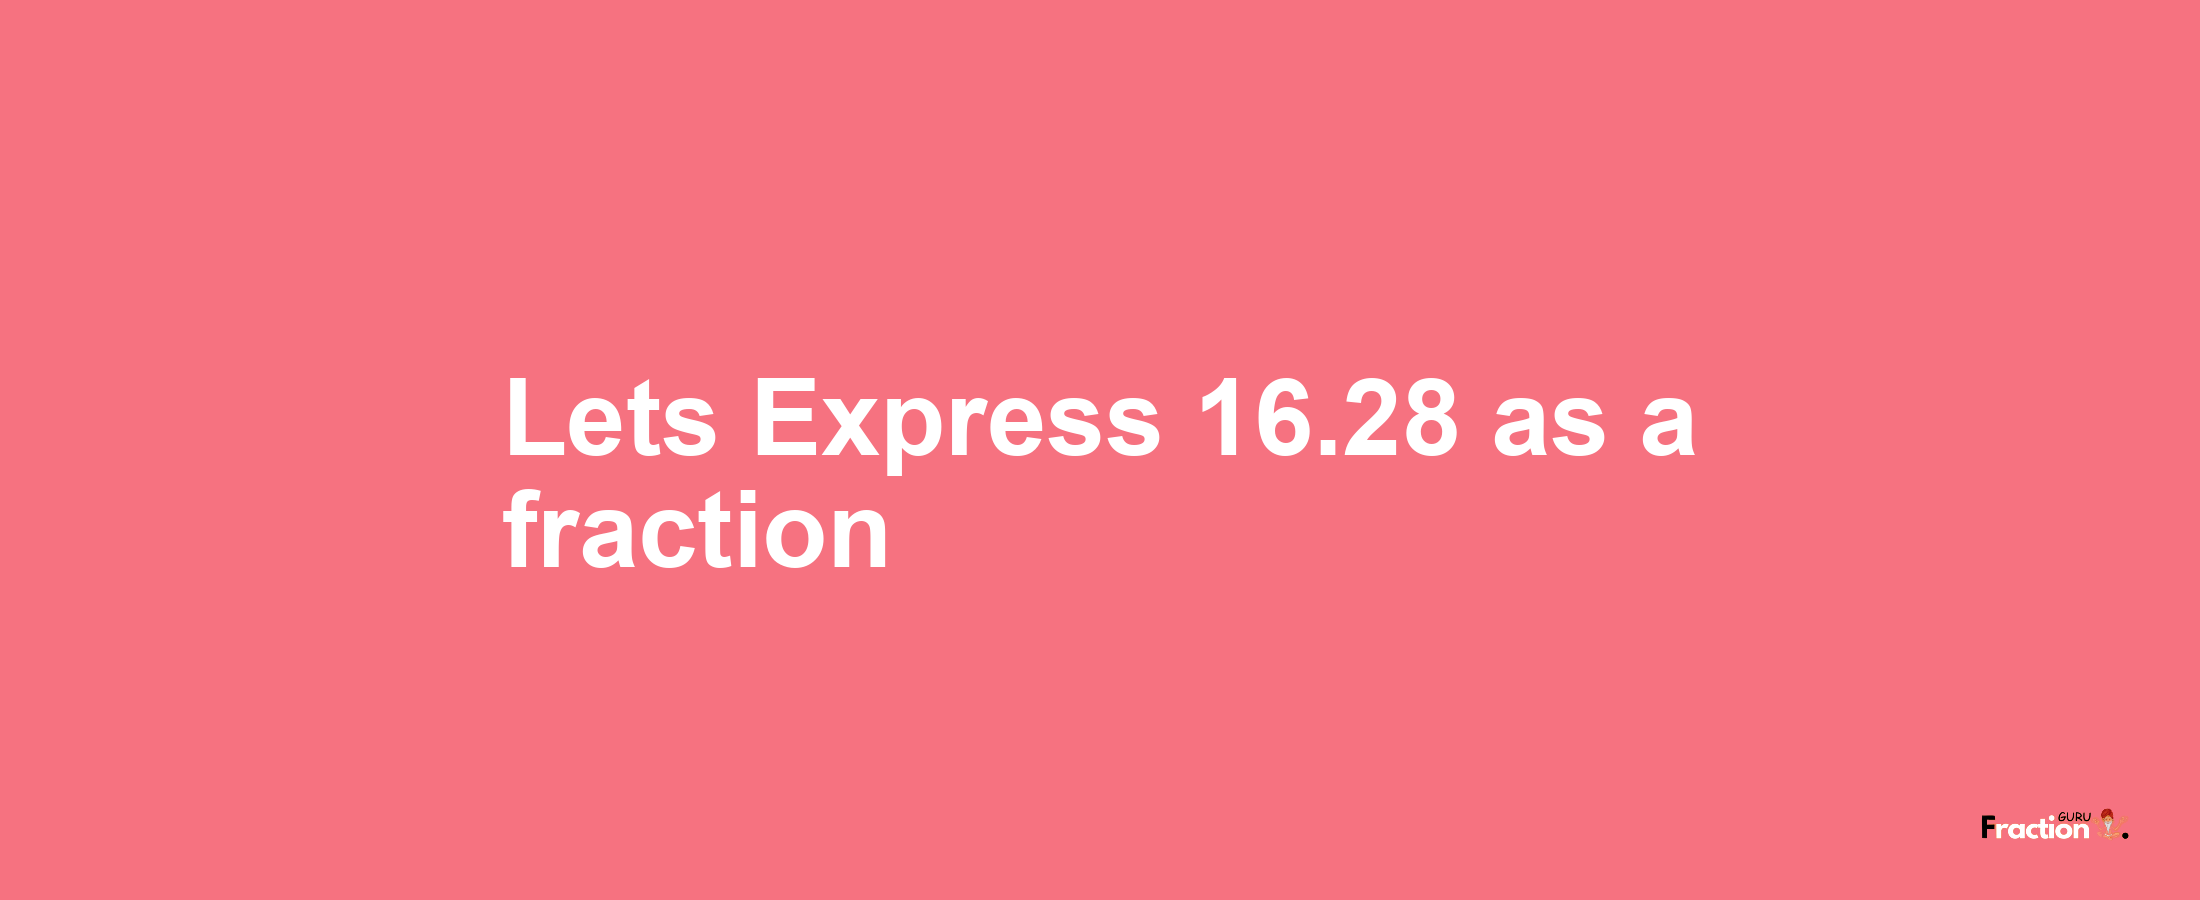 Lets Express 16.28 as afraction